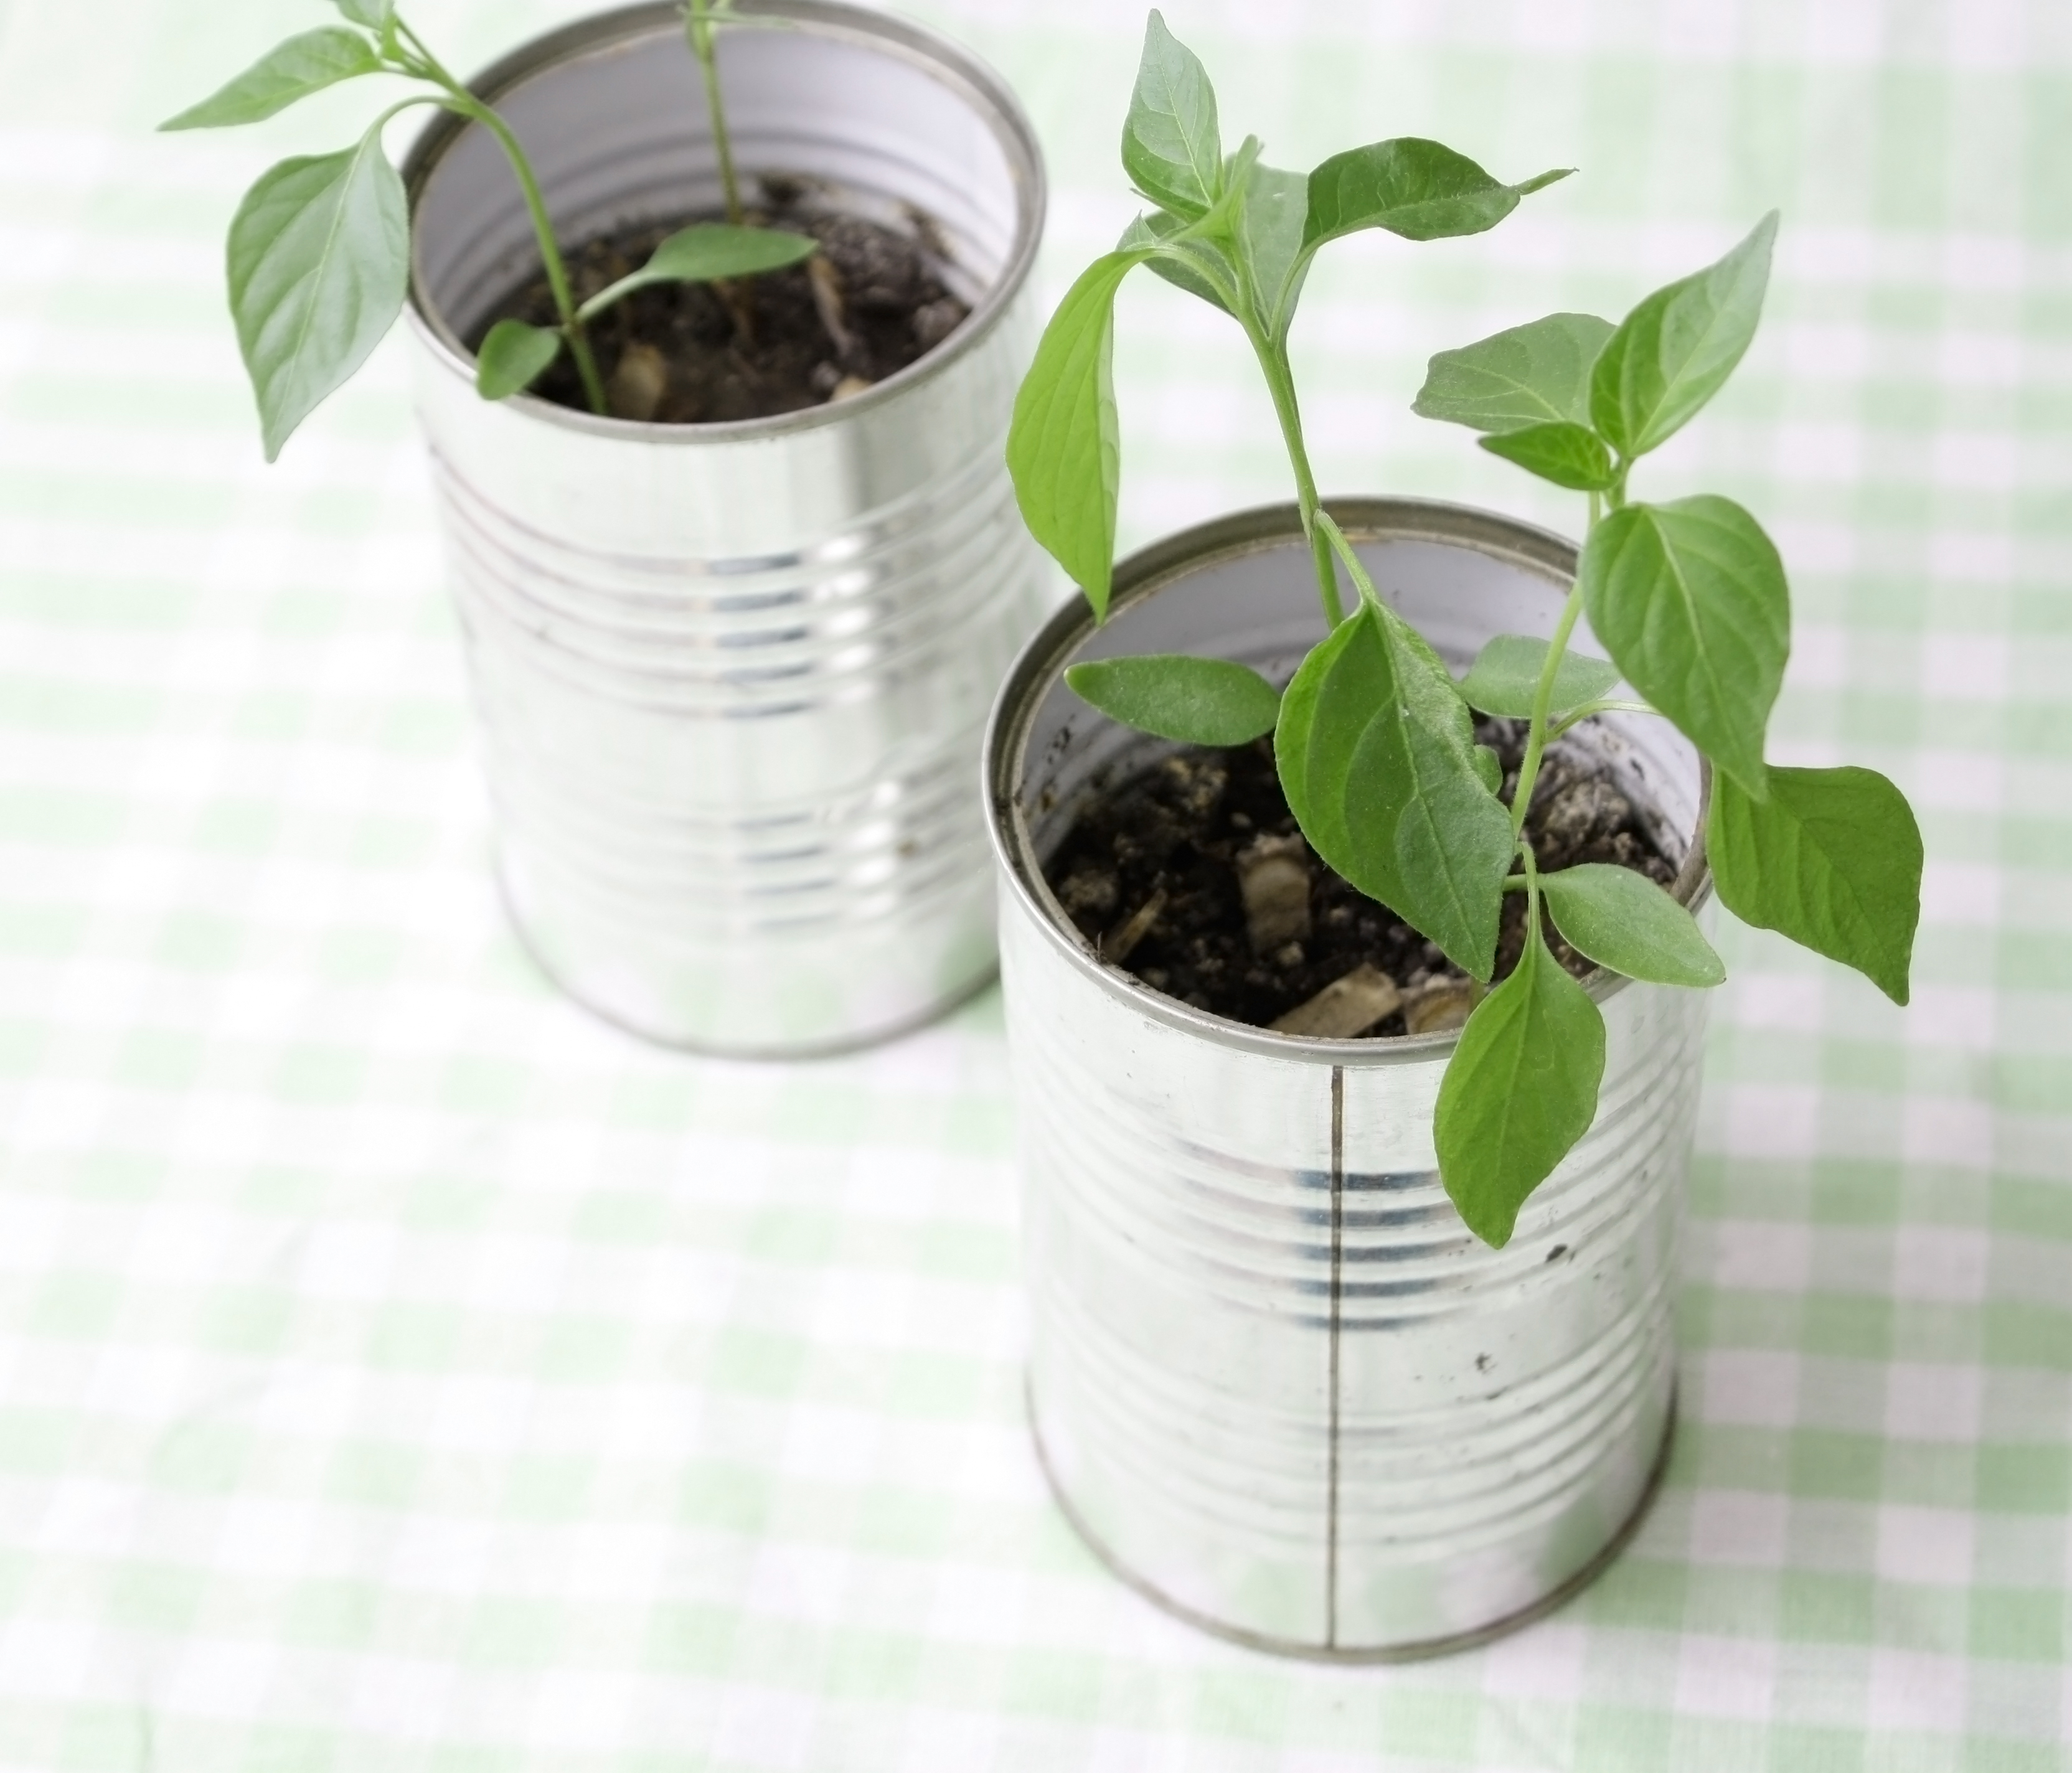 A small plant in a tin can